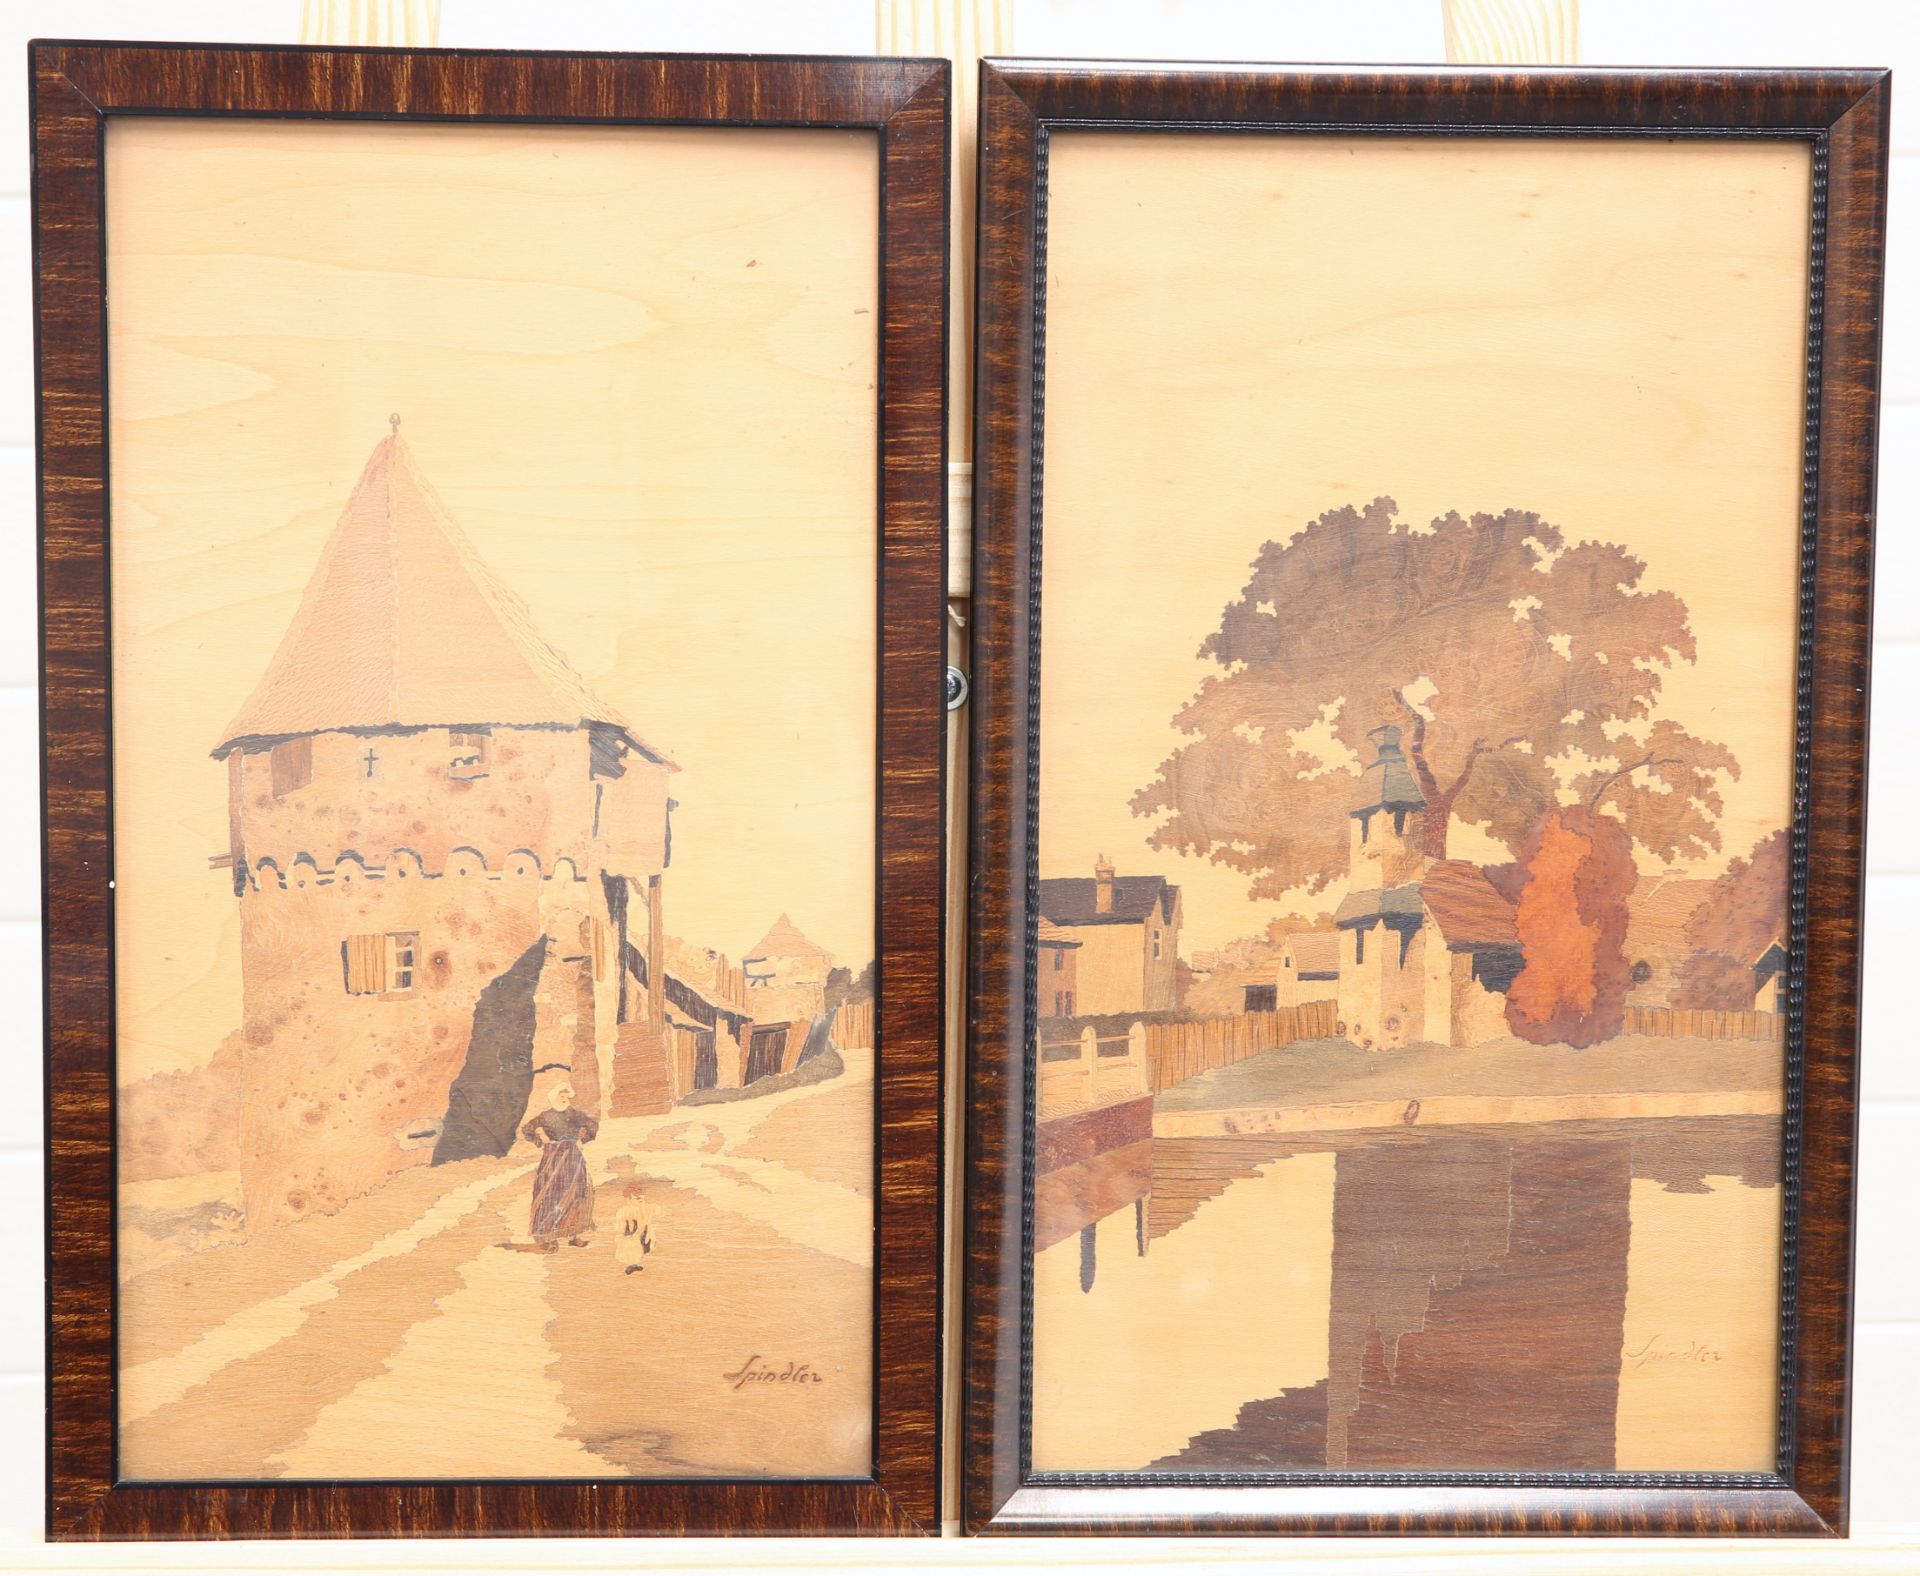 A PAIR OF CHARLES SPINDLER (1865-1938) MARQUETRY PICTURES